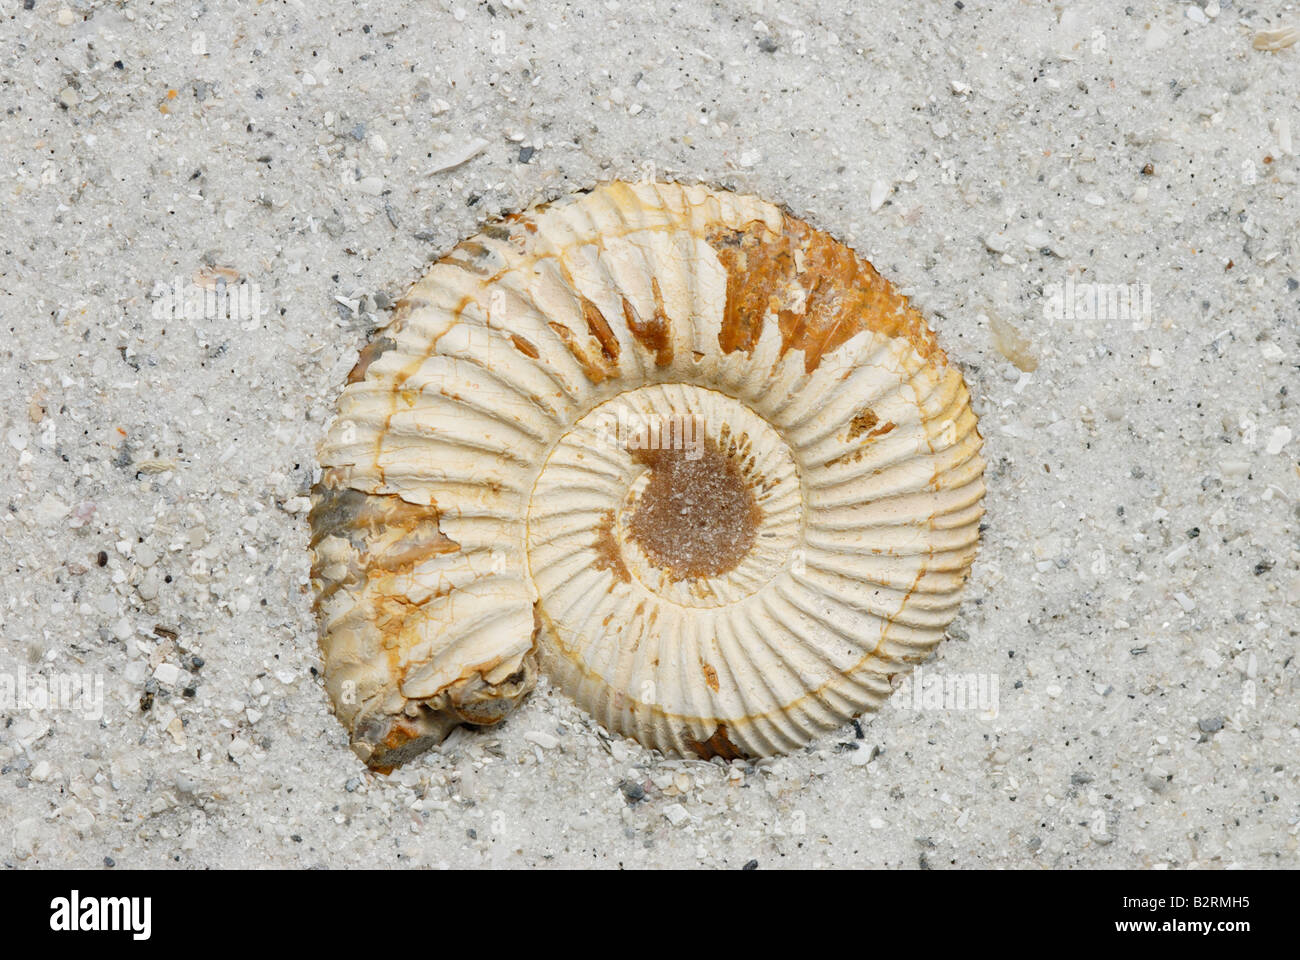 External view of an ammonite fossil Perisphinctes sp from Madagascar Jurassic Period Stock Photo